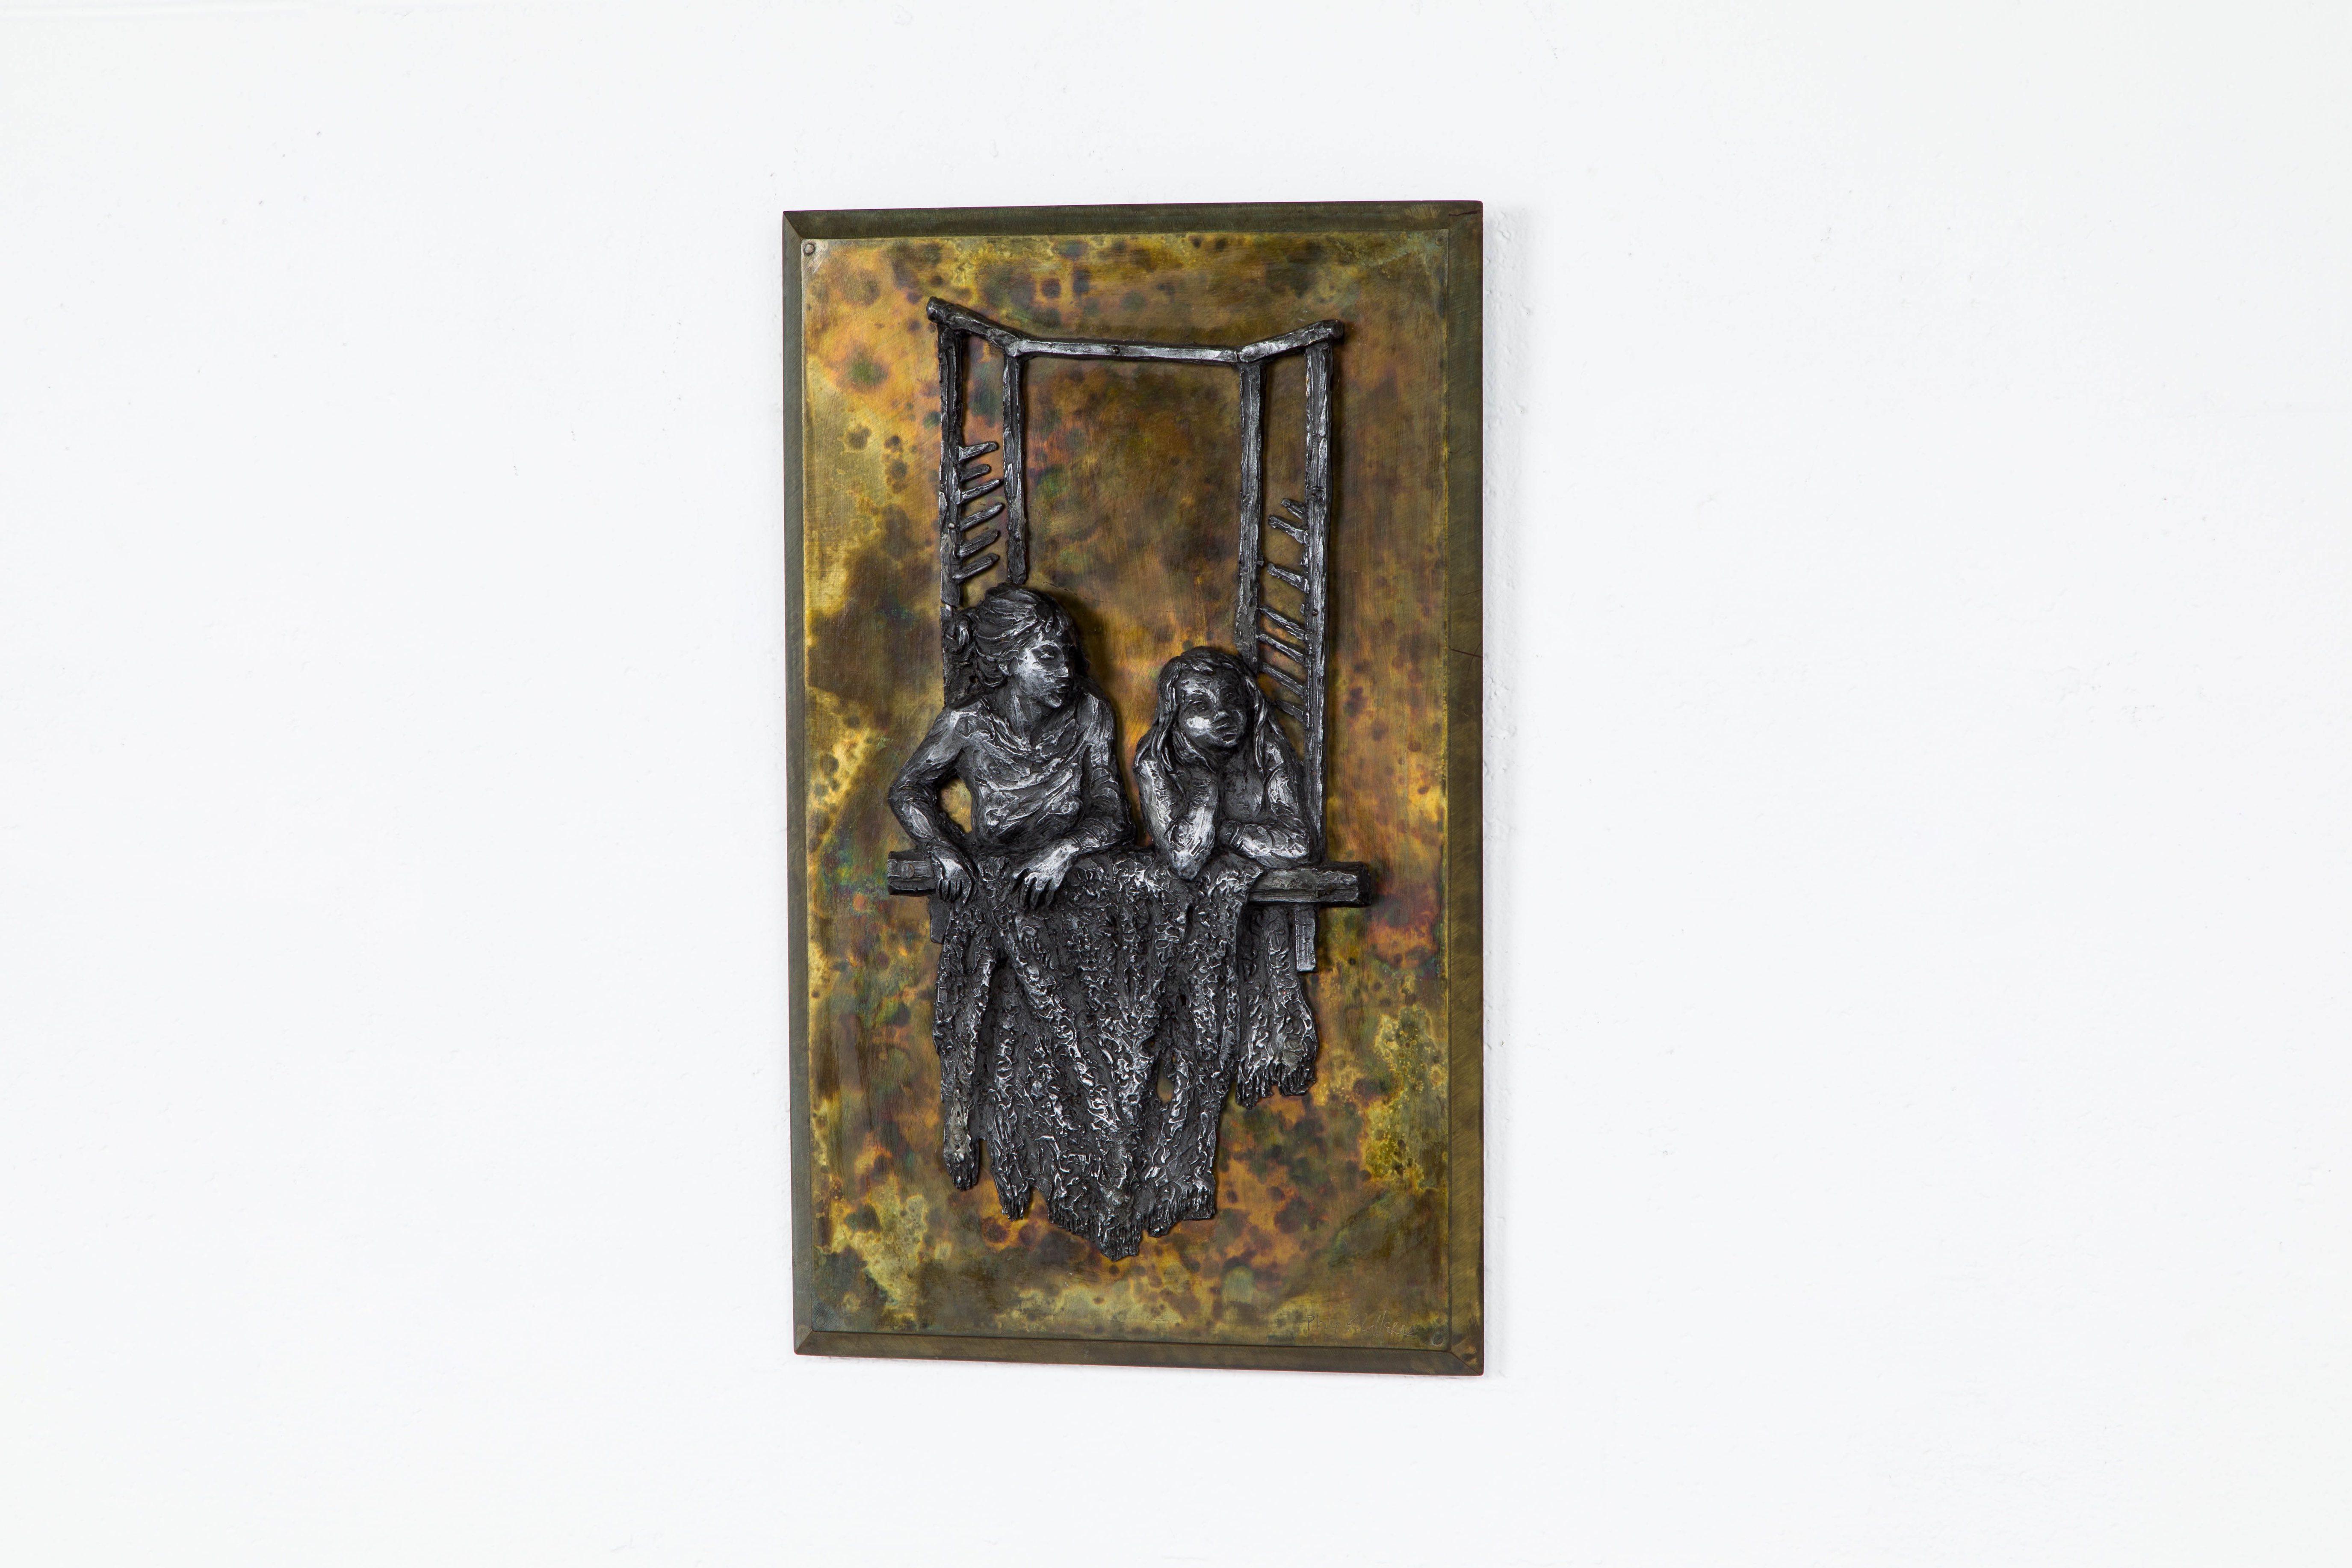 This work of fine art by Philip and Kelvin LaVerne (New York, 1960s) is a beautiful bronze and pewter wall relief which displays two young sisters leaning out of a latticed window frame holding a throw blanket. The relief was sculpted from pewter